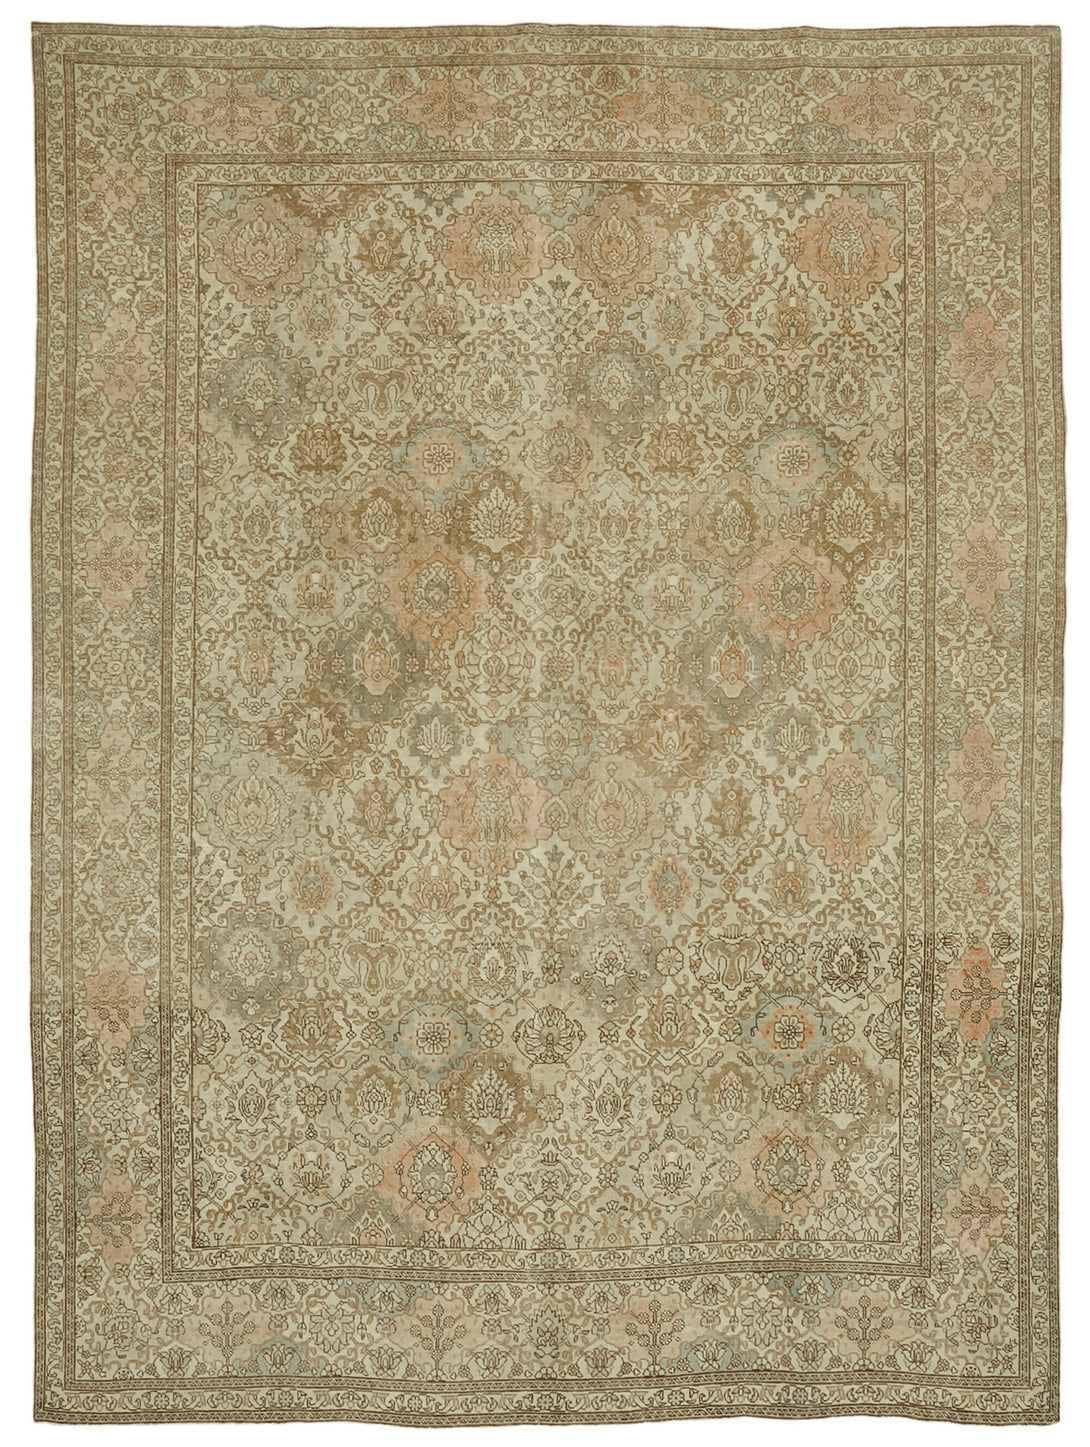 Handmade Persian Vintage Area Rug > Design# OL-AC-41070 > Size: 9'-7" x 12'-10", Carpet Culture Rugs, Handmade Rugs, NYC Rugs, New Rugs, Shop Rugs, Rug Store, Outlet Rugs, SoHo Rugs, Rugs in USA